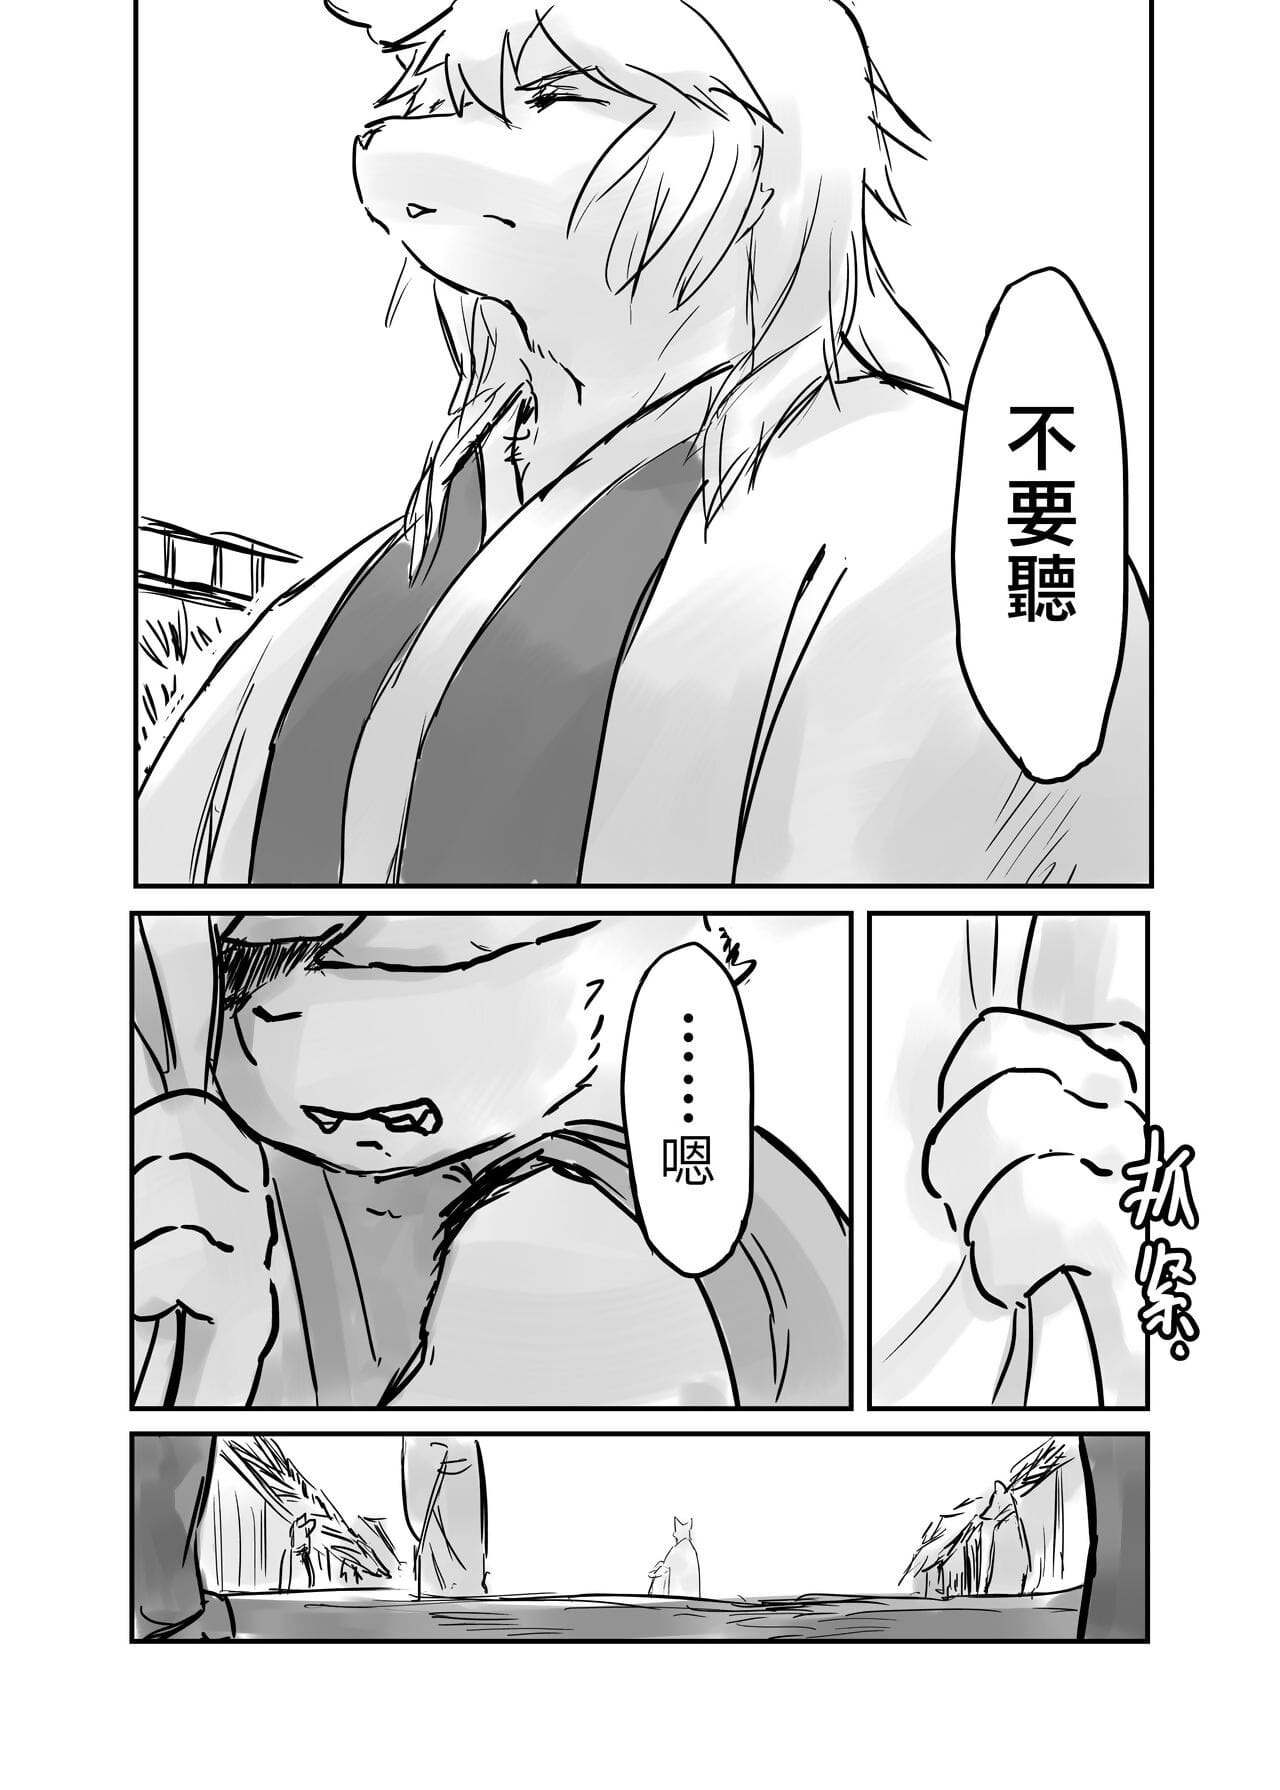 （the visitatore 他乡之人 by：鬼流 parte 2 page 1